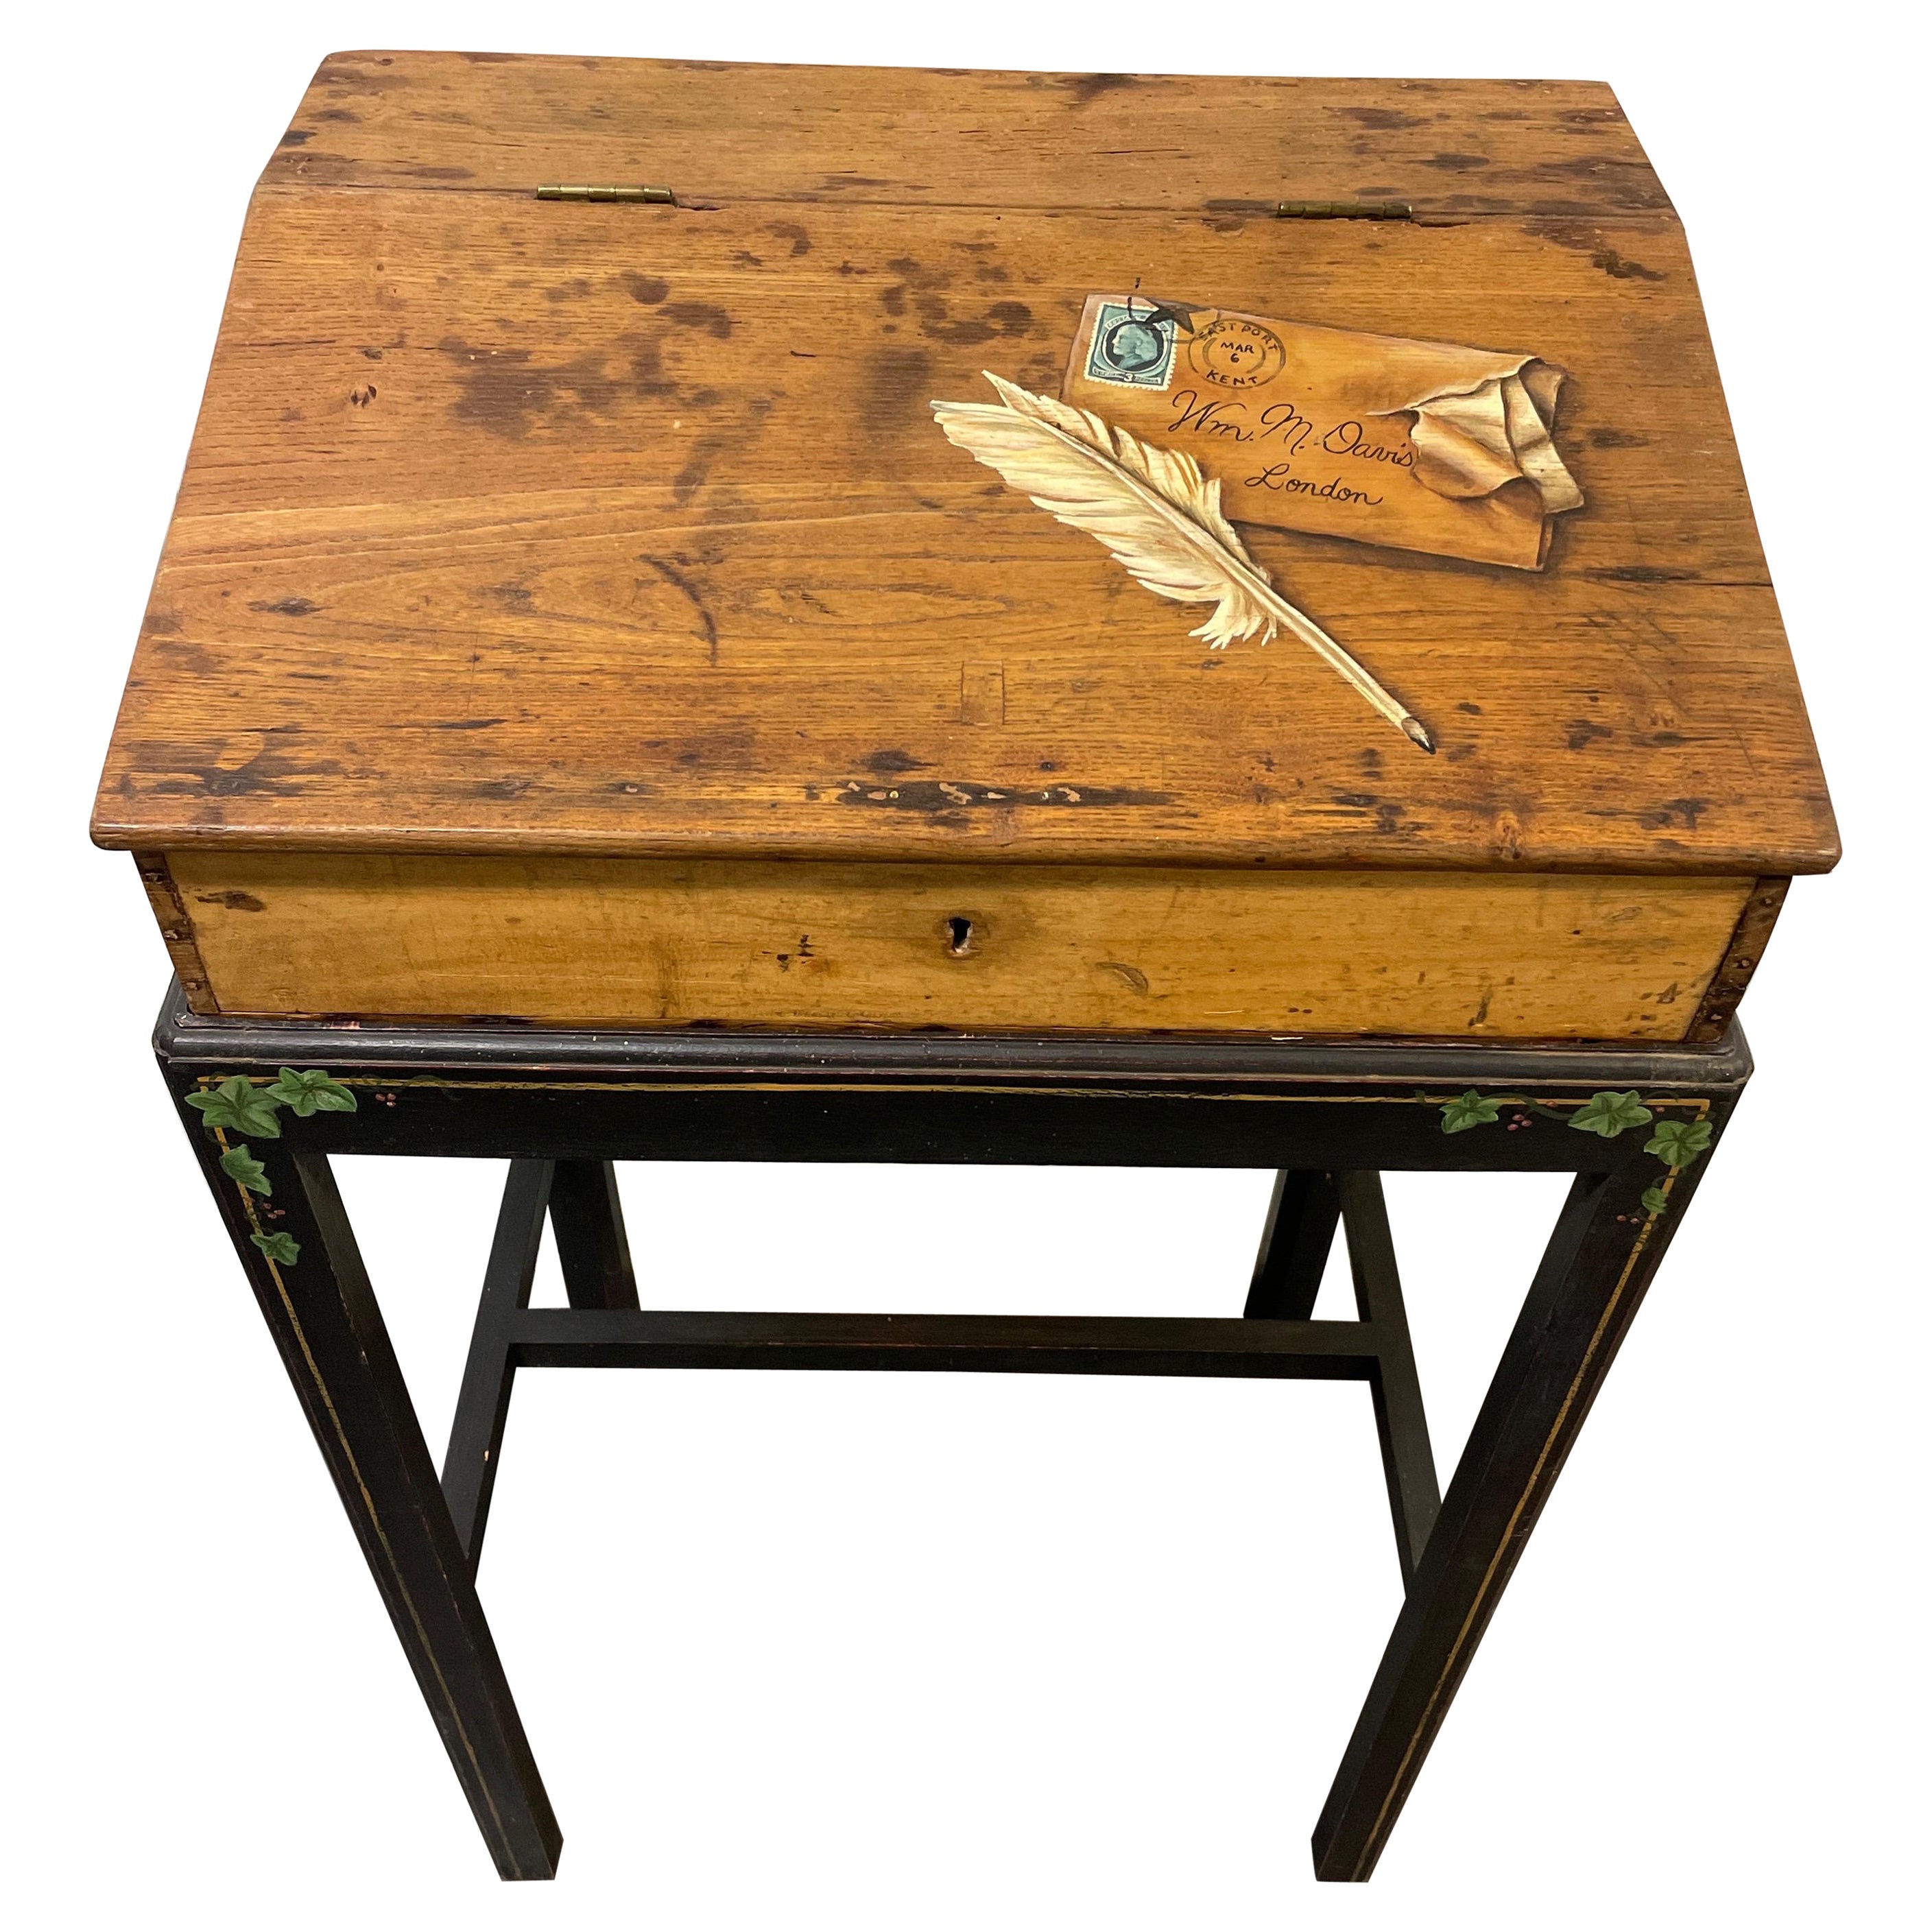 English Trompe I'oeil Painted Lap Desk on Stand For Sale